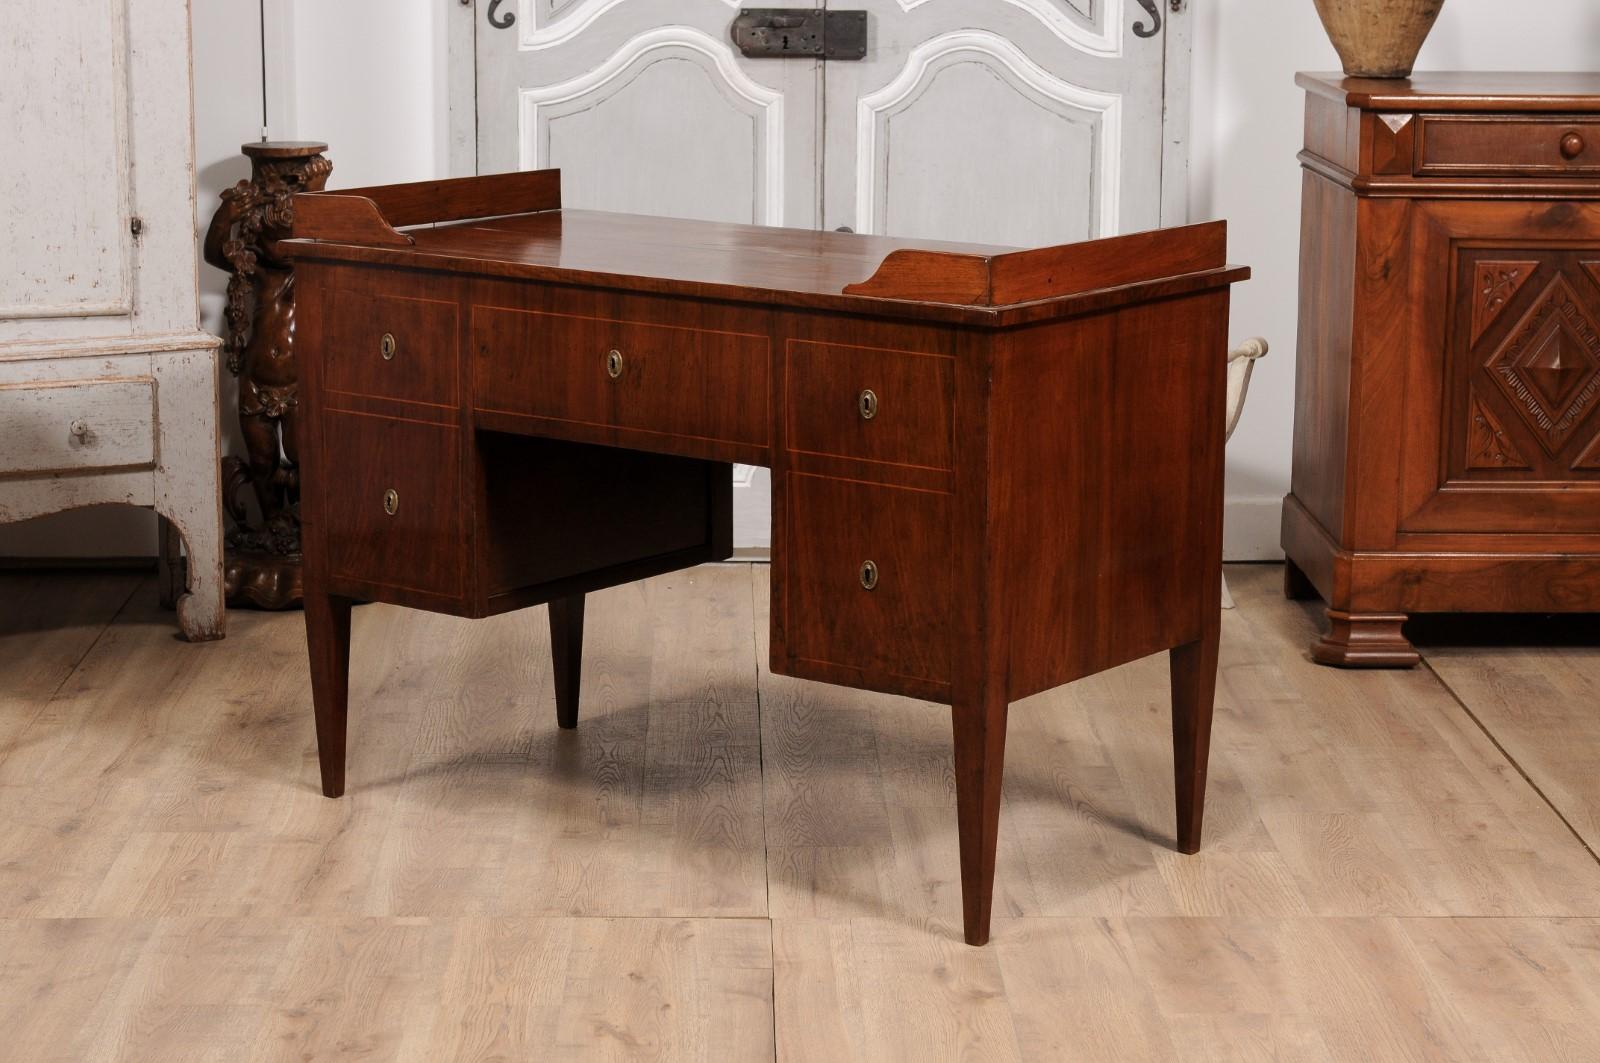 Italian 1820s Walnut and Mahogany Desk with Five Drawers, Pull-out and Banding For Sale 3